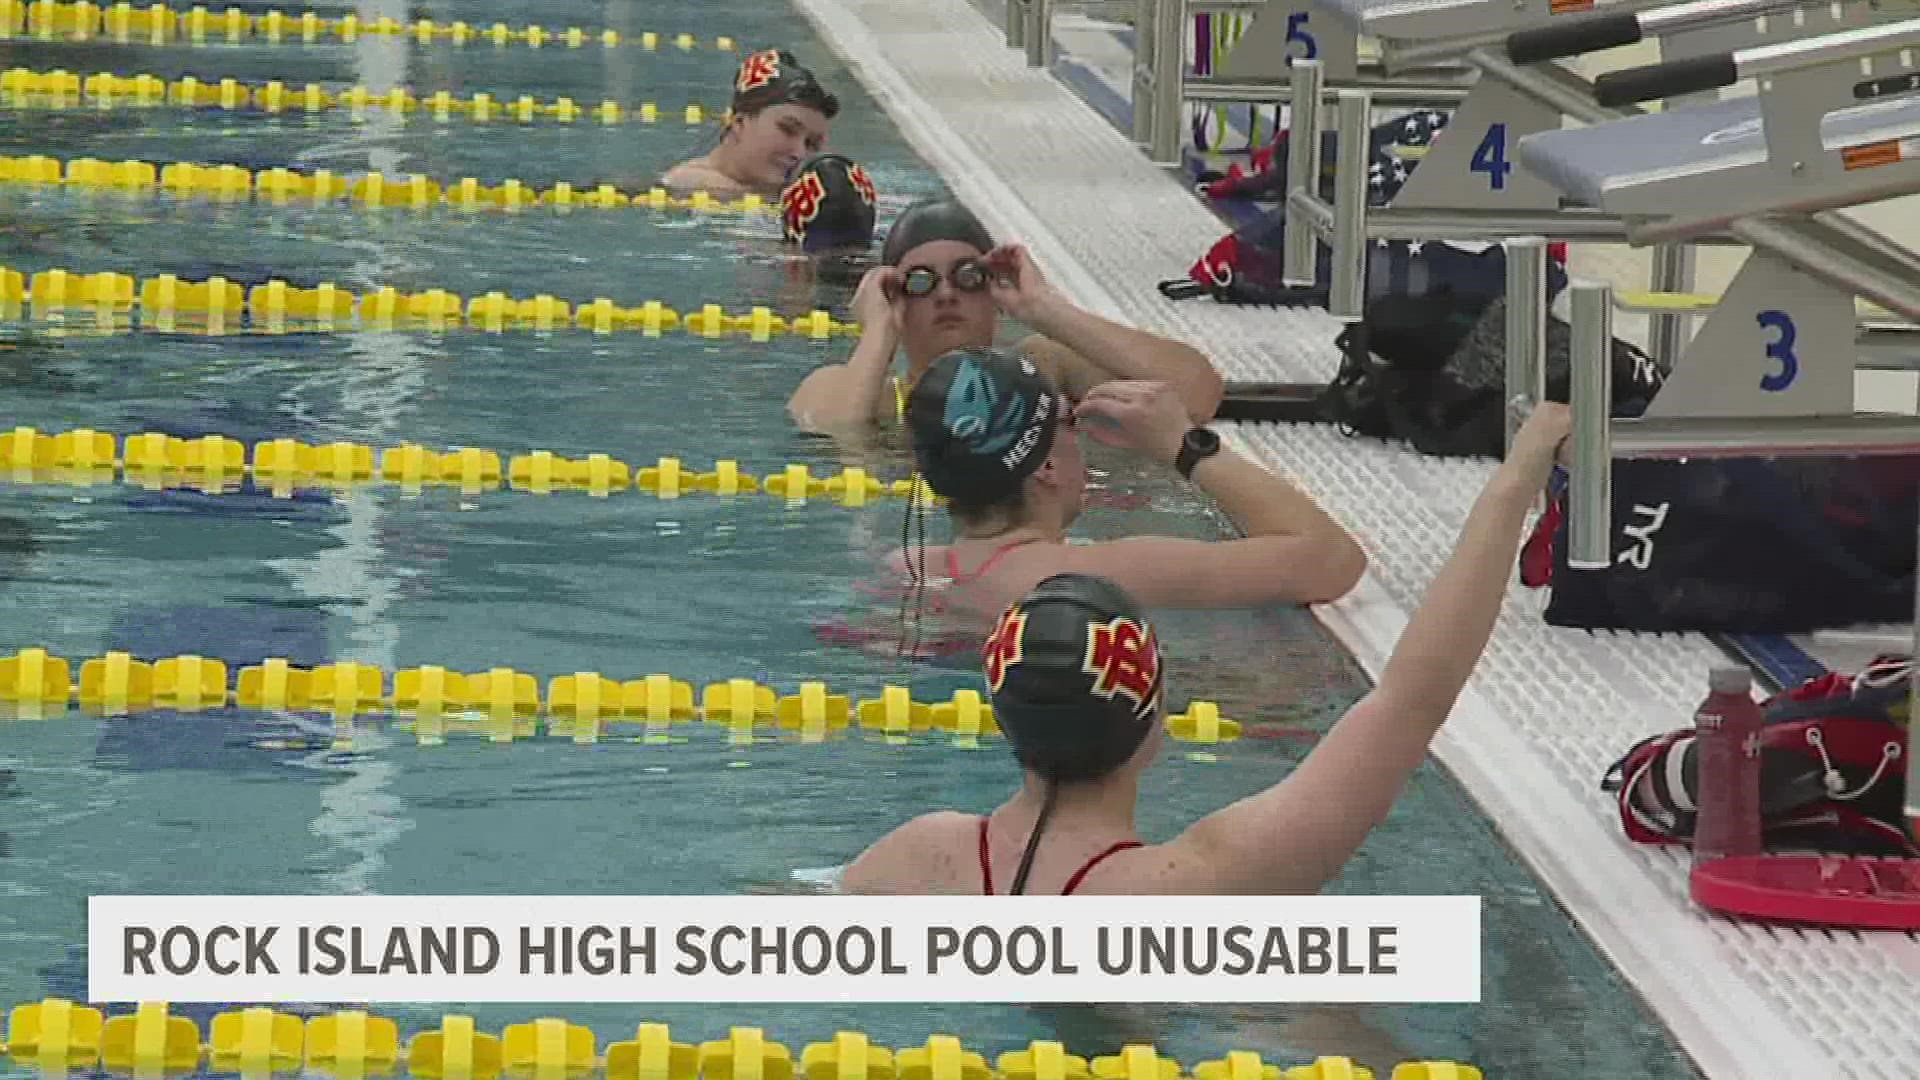 Students are forced to find their own transportation to swim practice at different locations